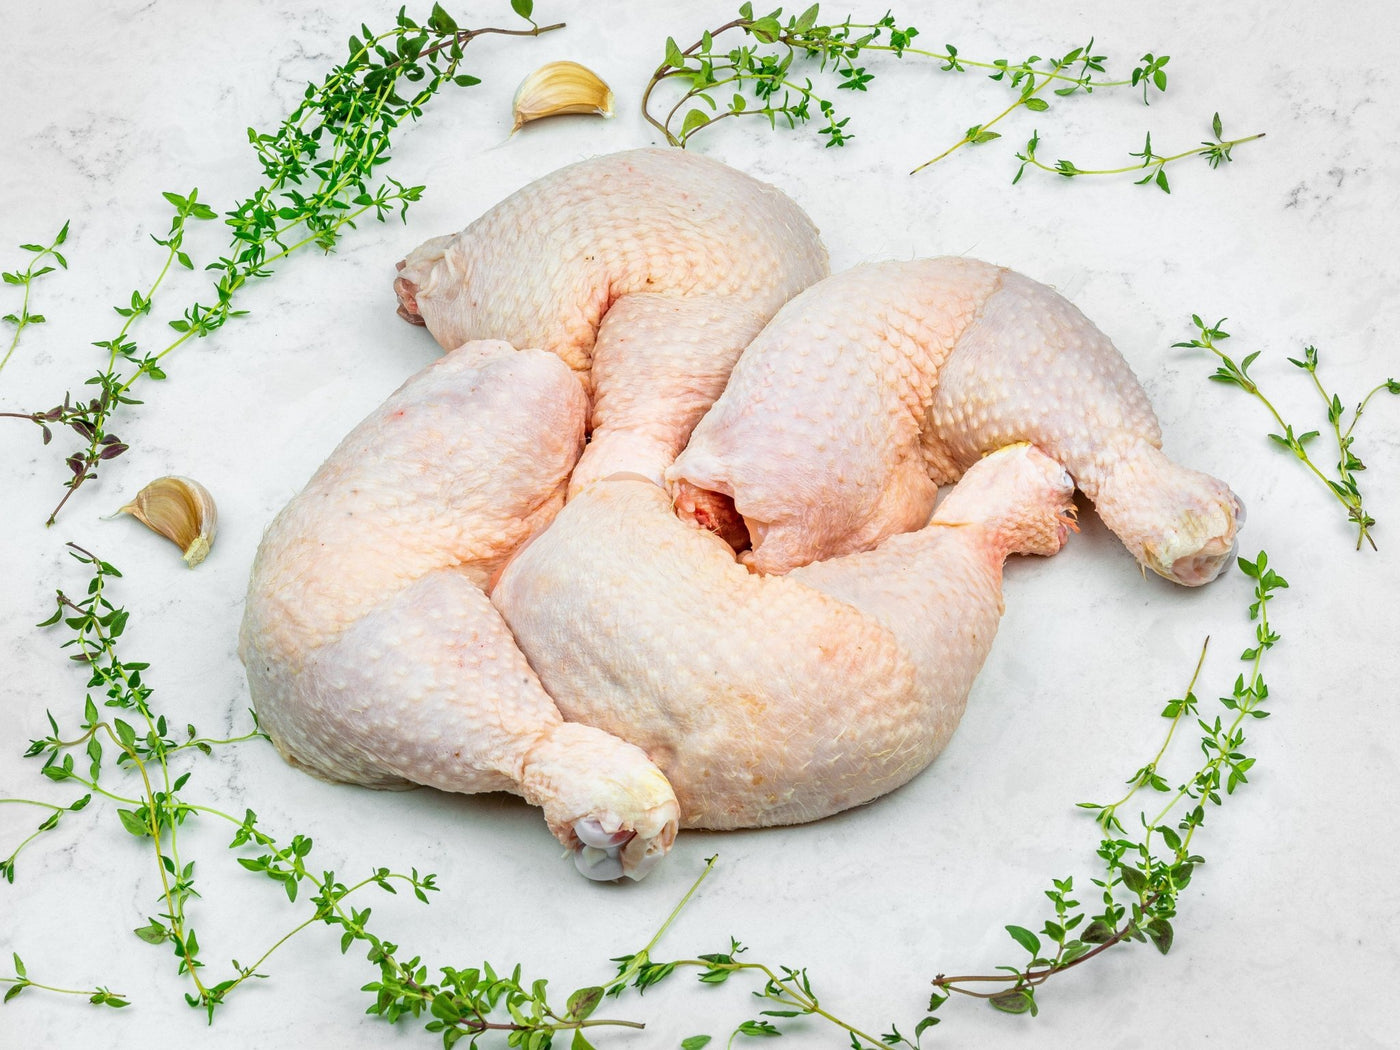 Free Range Herb Fed Chicken Whole Legs - Chicken - Thomas Joseph Butchery - Ethical Dry-Aged Meat The Best Steak UK Thomas Joseph Butchery